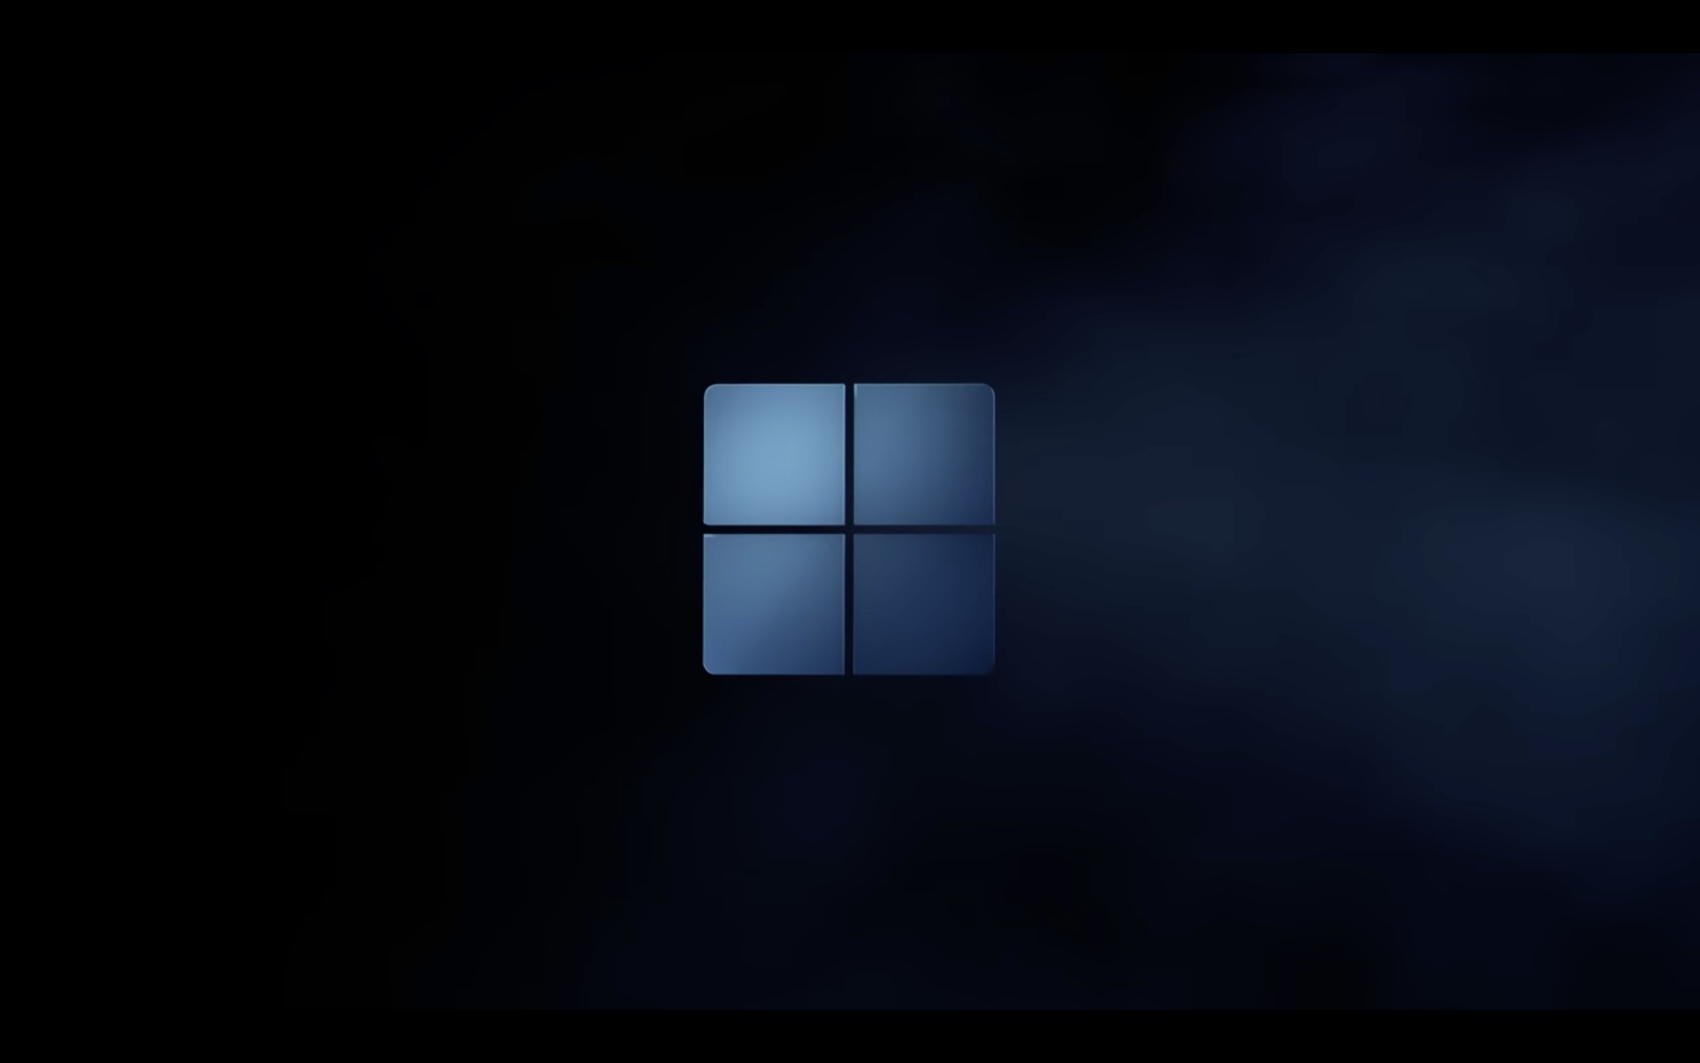 Windows 11 Will Ship With Light Mode on by Default, Not Dark Mode